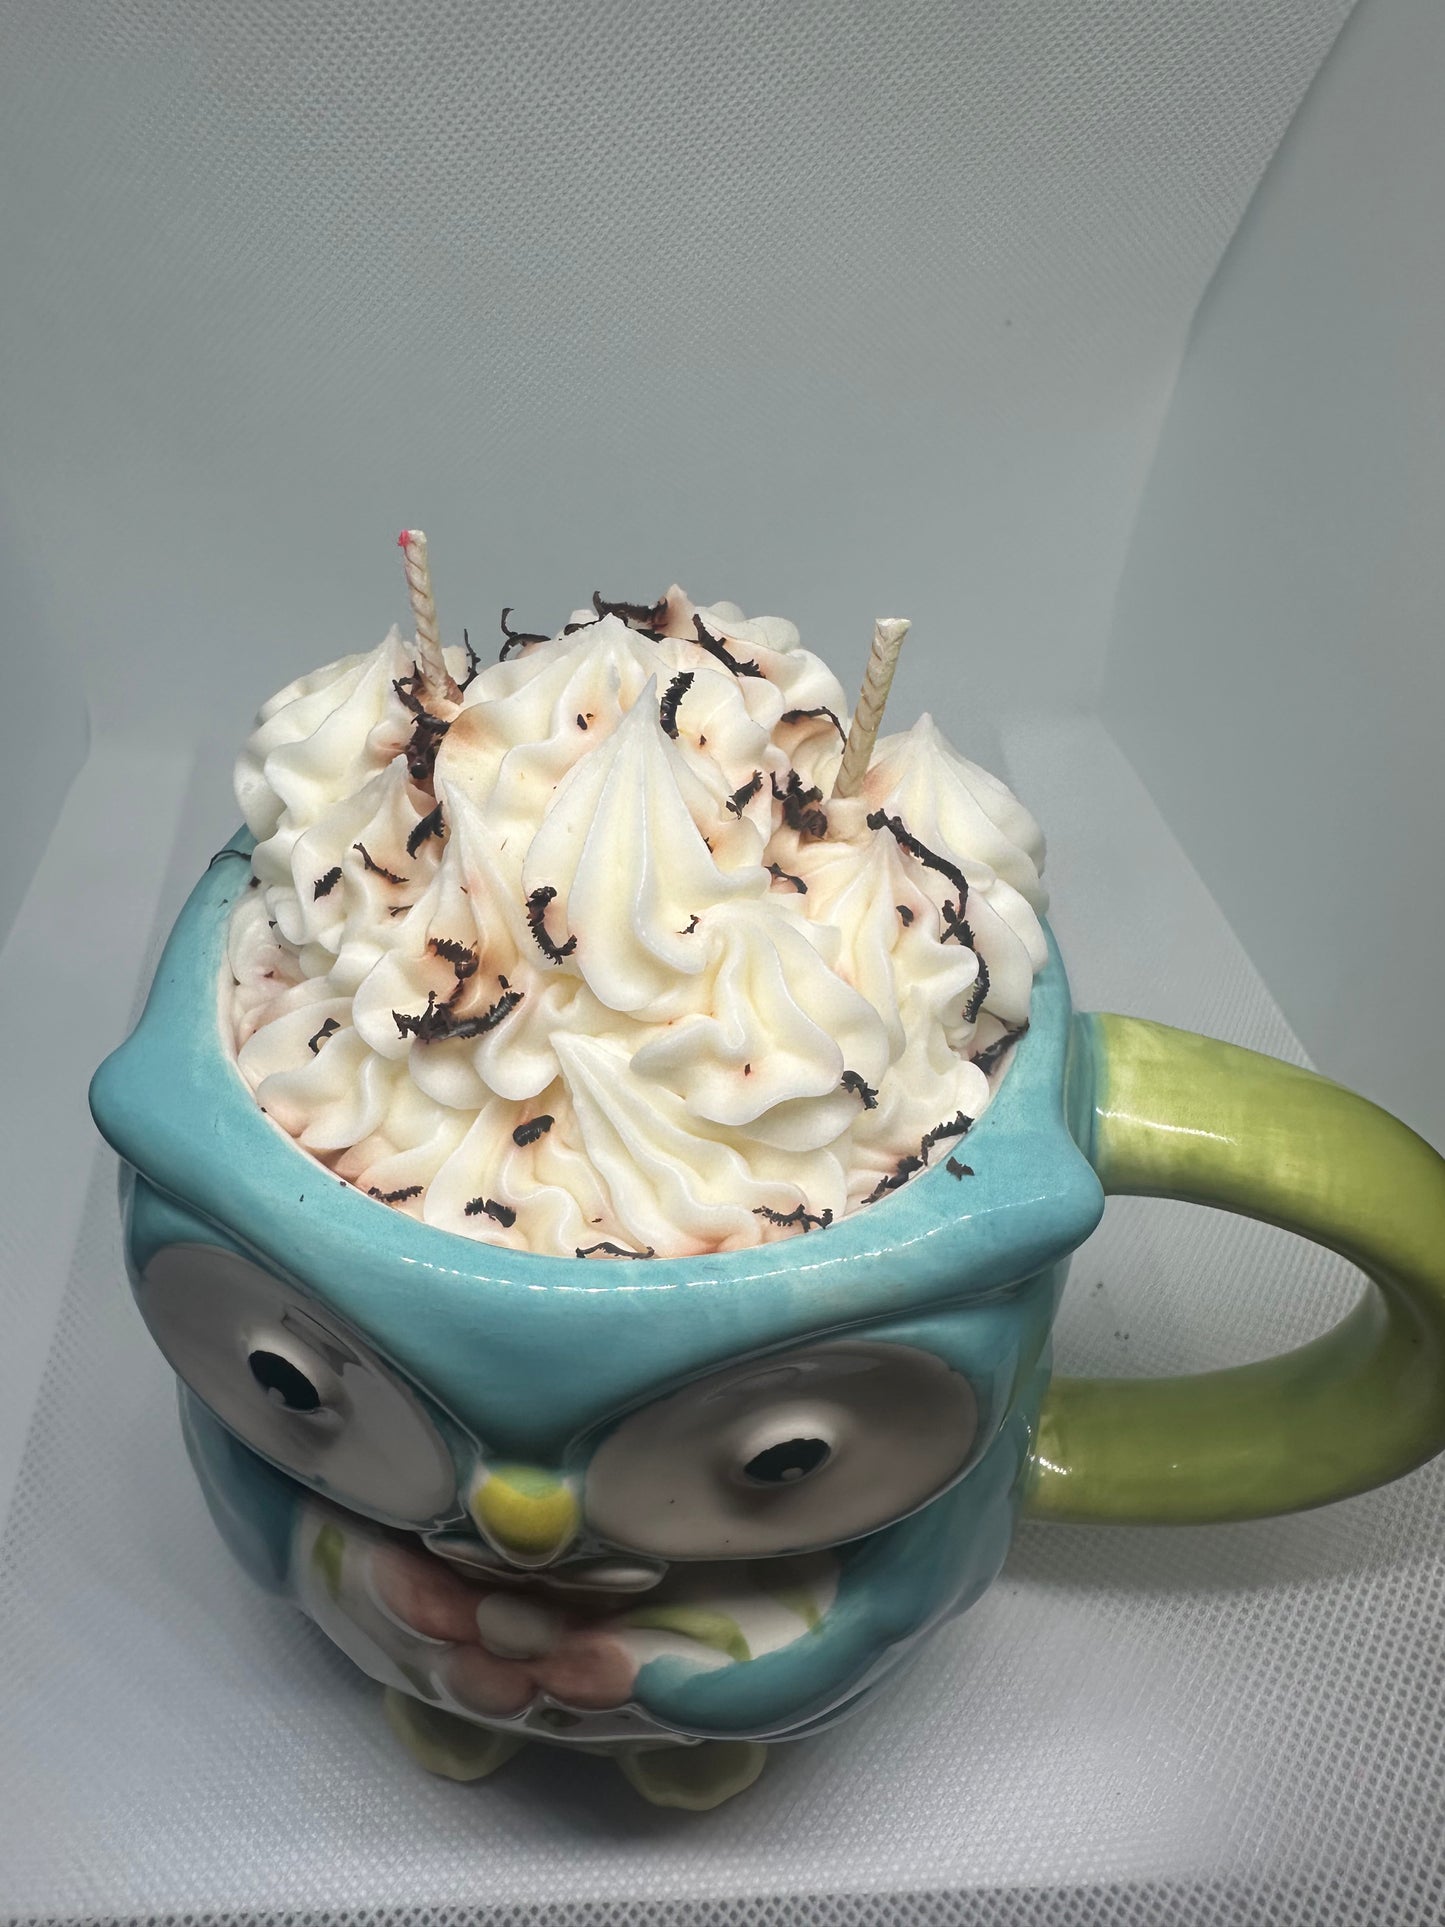 Owl coffee and whipped cream